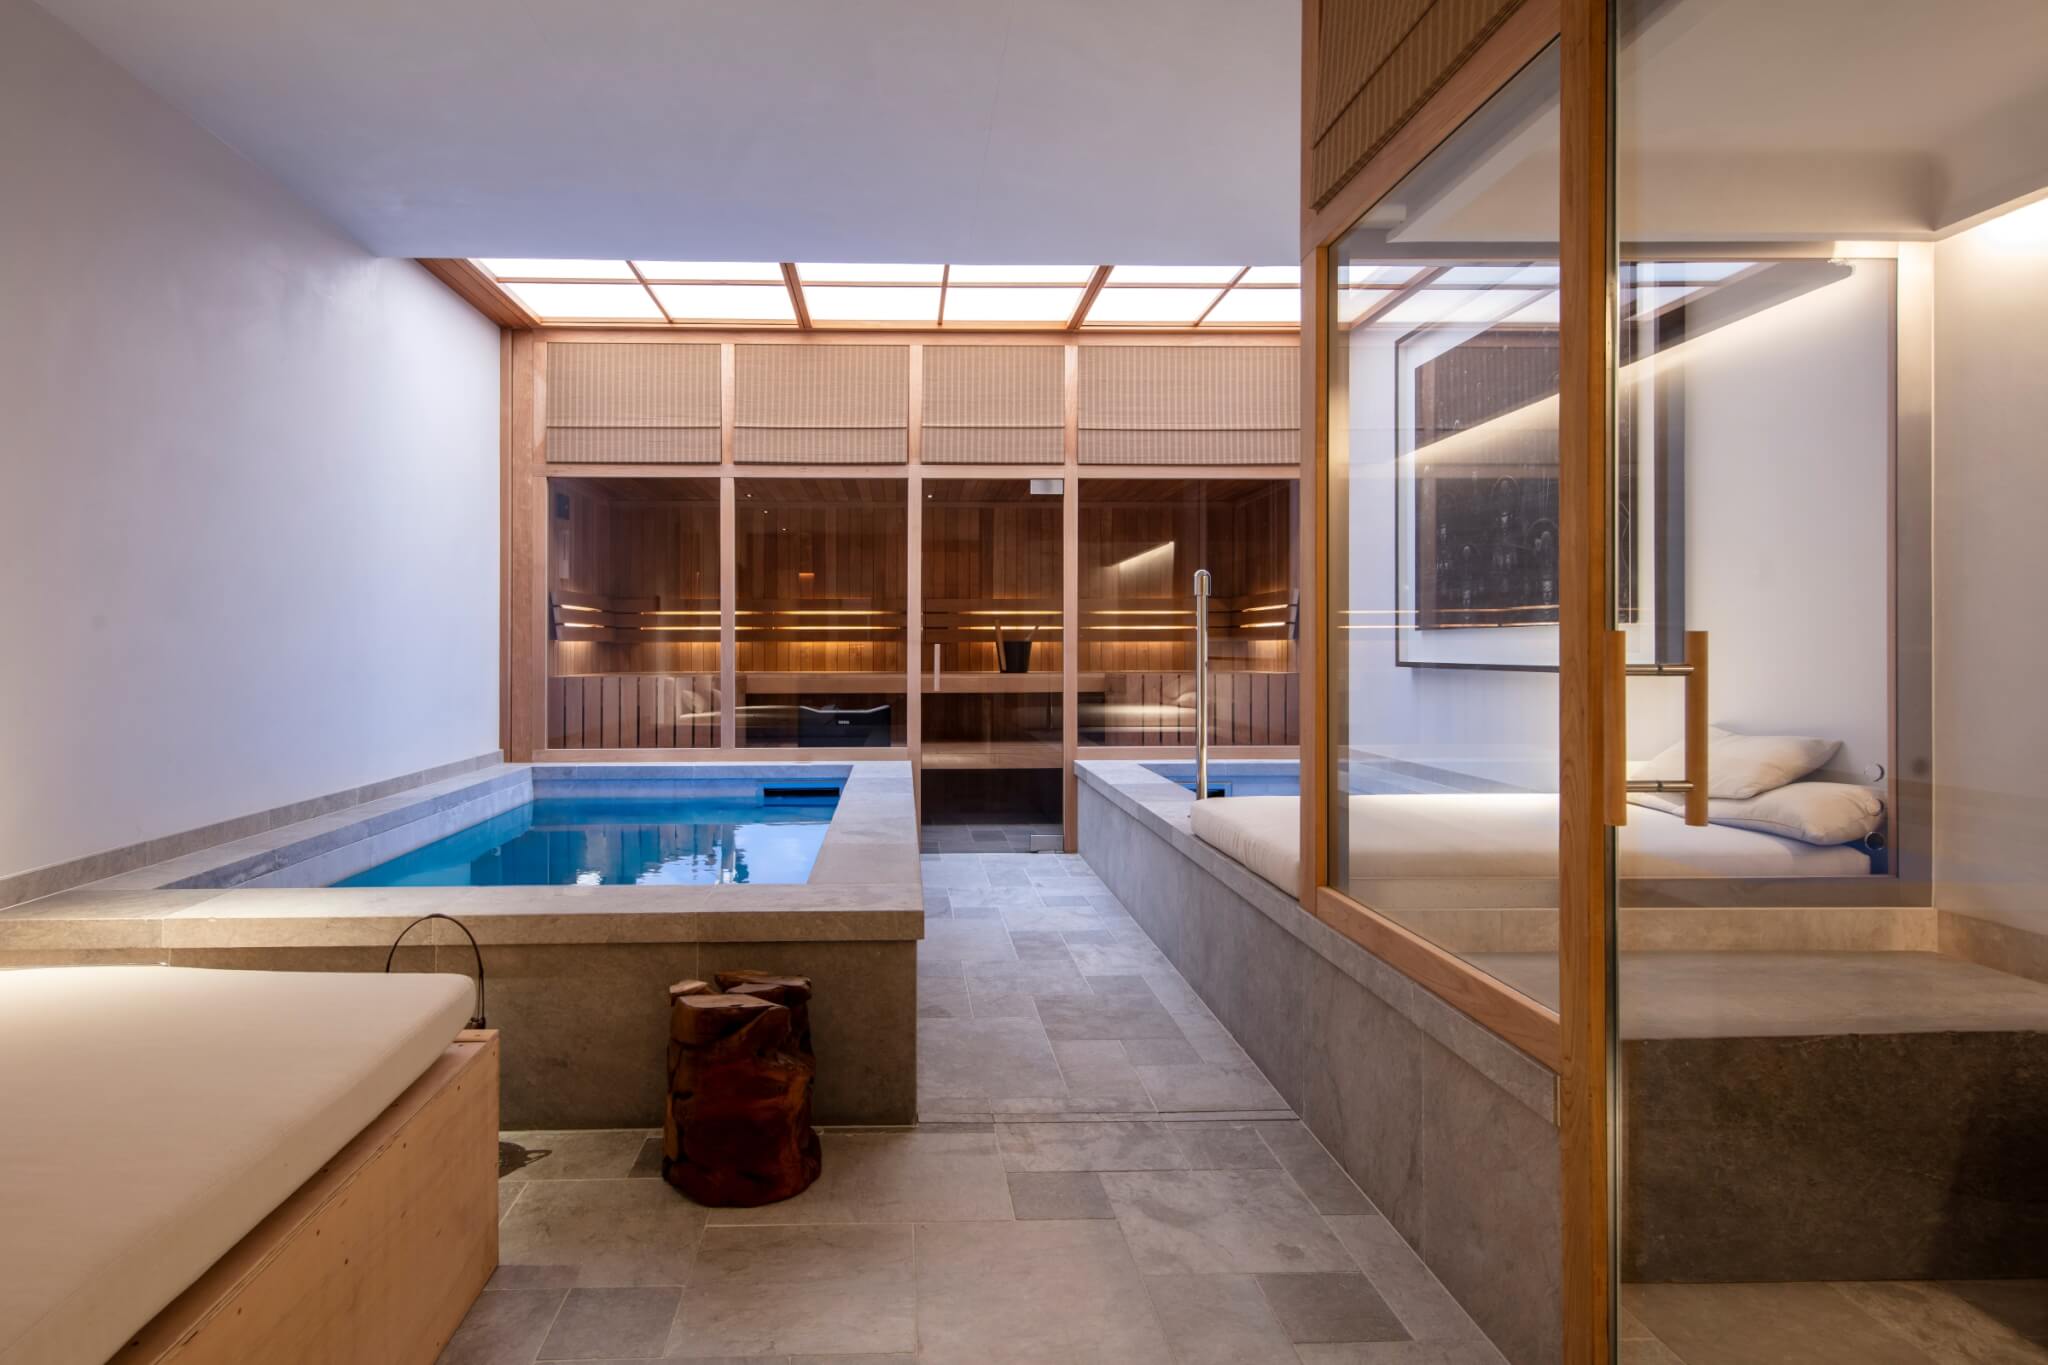 Luxury pool and sauna ventilation in a prime residence in Holland Park